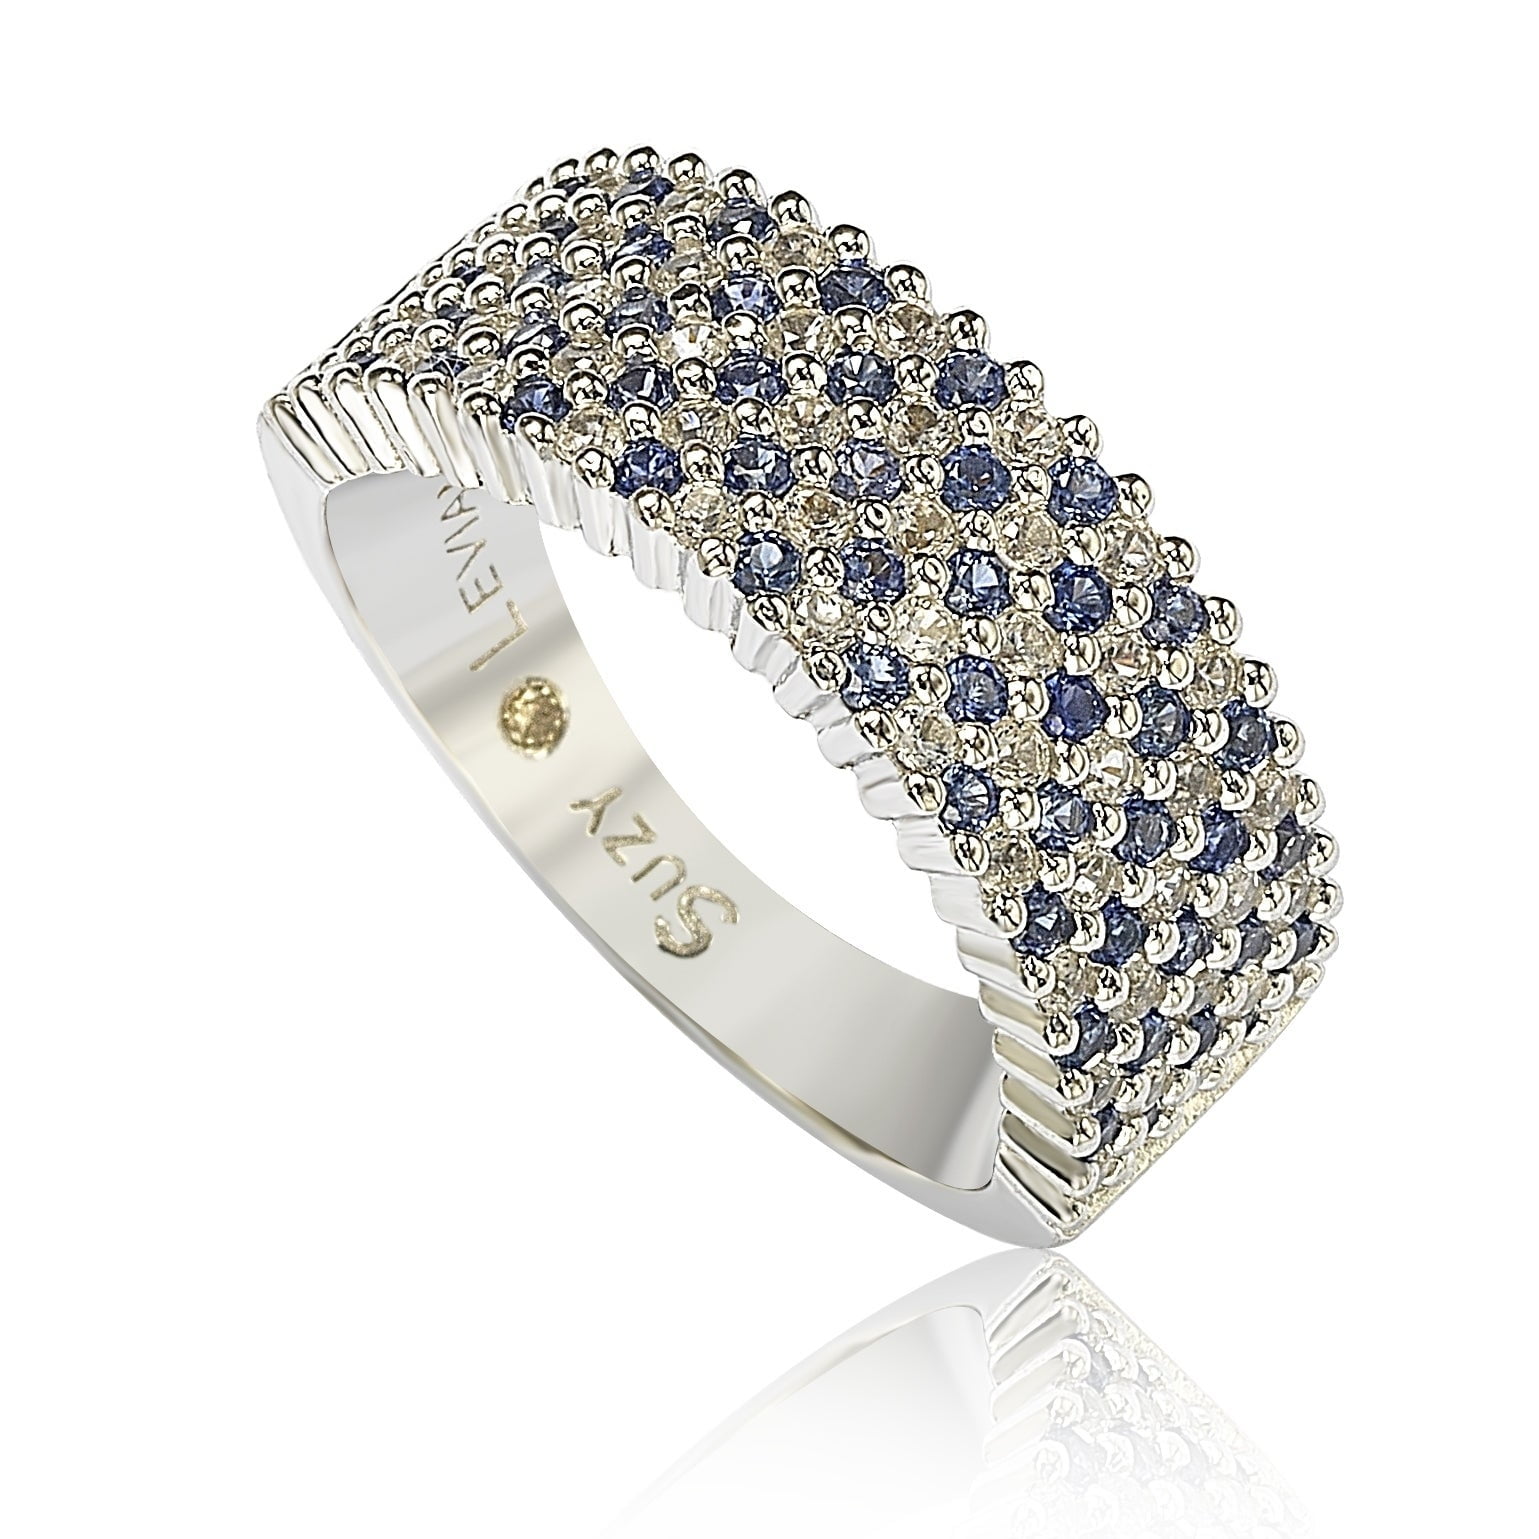 Details about   Handmade 925 Sterling Silver Natural Diamond & Sapphire Gems Wedding Gift Ring 